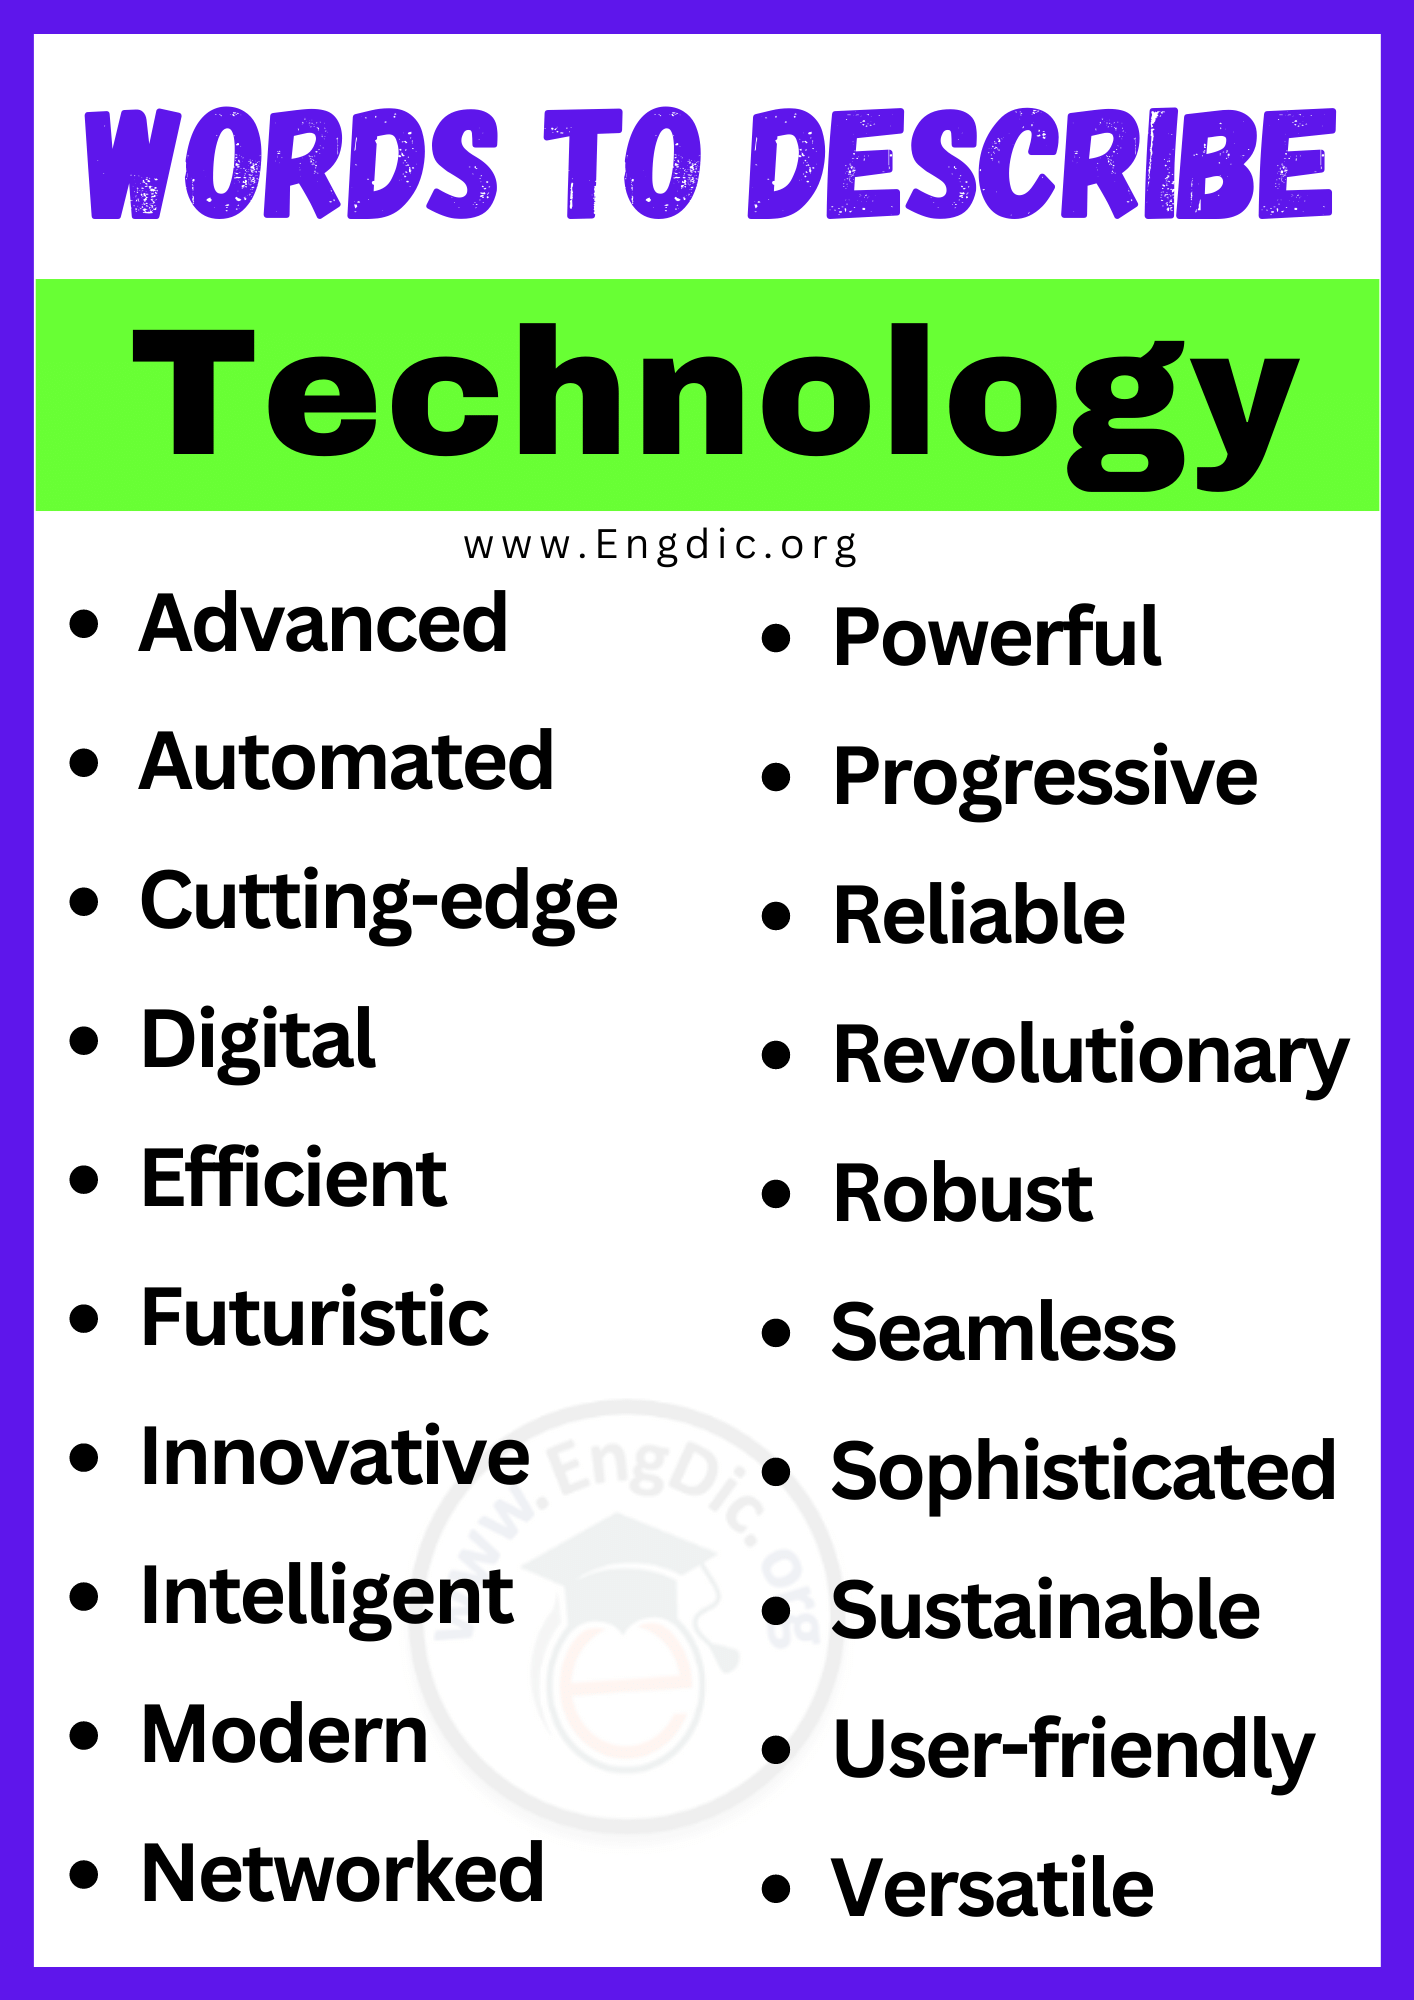 Words to Describe Technology